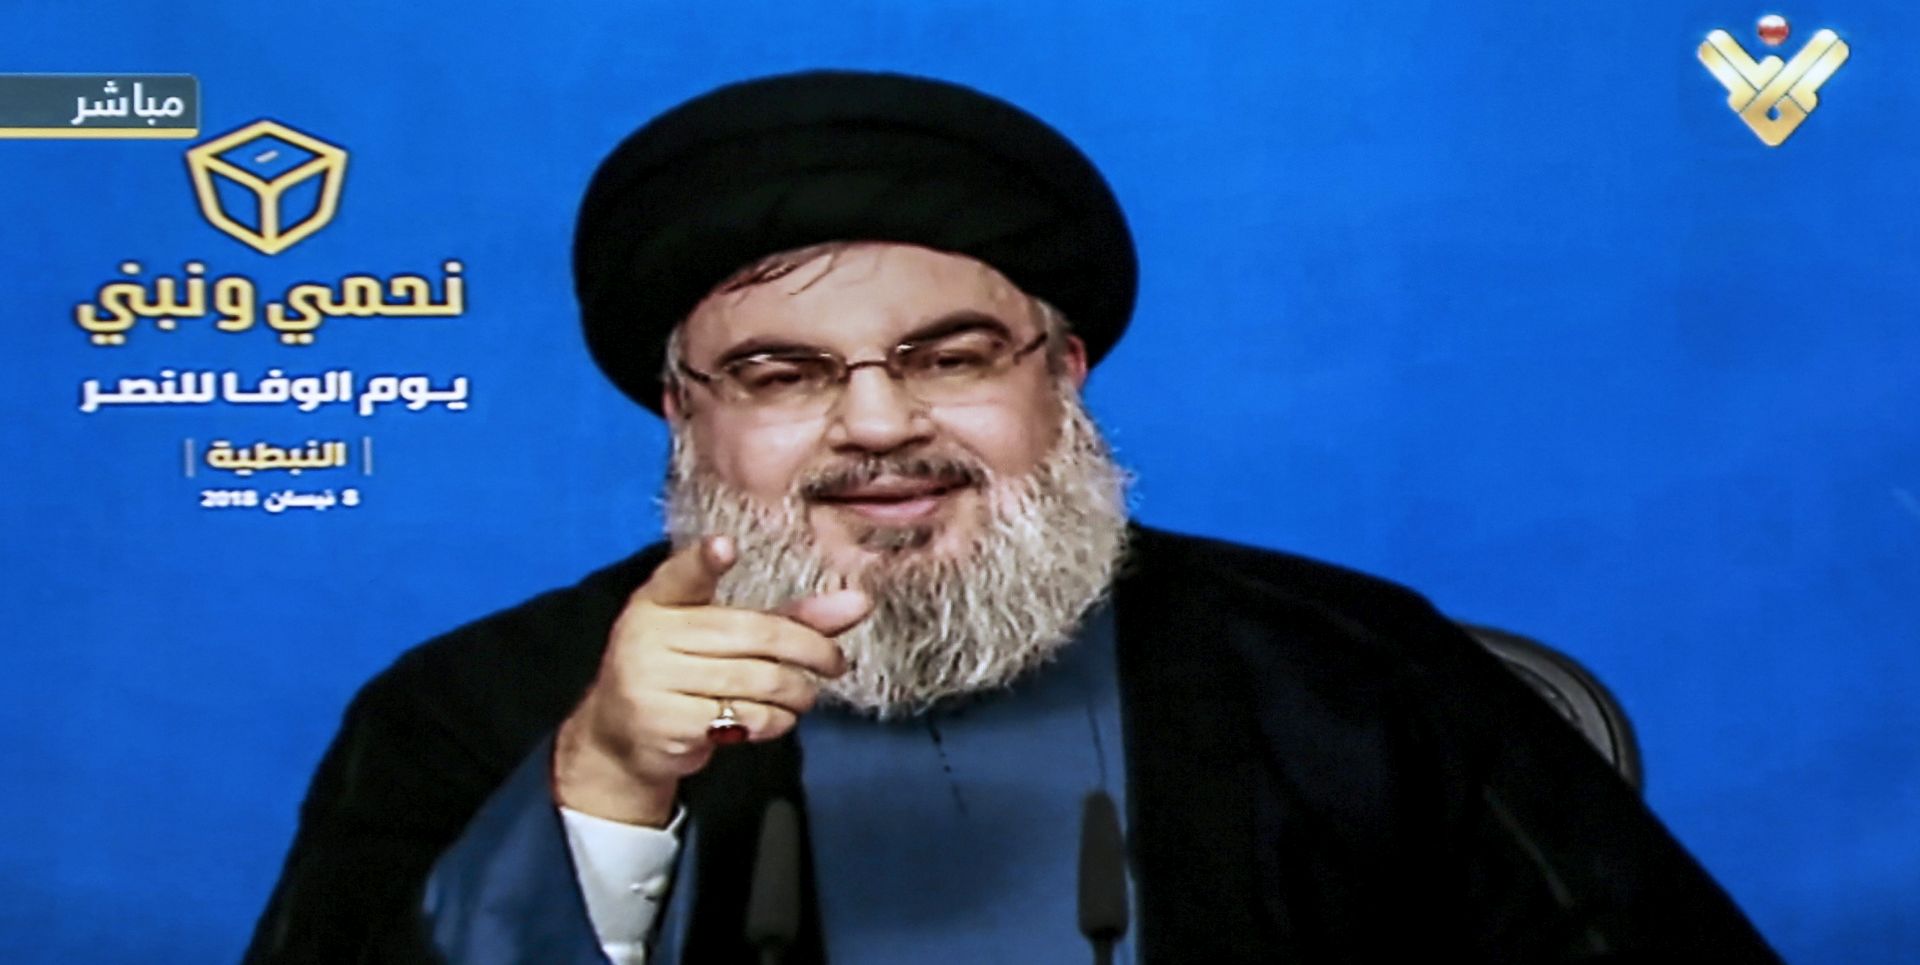 epa06655464 A TV grab from Hezbollah's al-Manar TV shows Hezbollah leader Sayed Hassan Nasrallah giving a televised address from an undisclosed place, during an election rally in Nabatyeh city, southern Lebanon, 08 April  2018. Nasrallah spoke about the treachery and treason against the resistance during the July 2006 war against the Israeli enemy by some politicians and the then government. He also talked about corruption, high cost of living, unemployment, and the public debt that is sweeping the country. He said 'It is the remnants of the political class and successive governments since 1992. The Lebanese should choose the candidates who protect the resistance that defended Lebanon and liberated it from the Israeli occupation, as well as the candidates who carry the project of change in order to save Lebanon'.  EPA/AL-MANAR TV GRAB